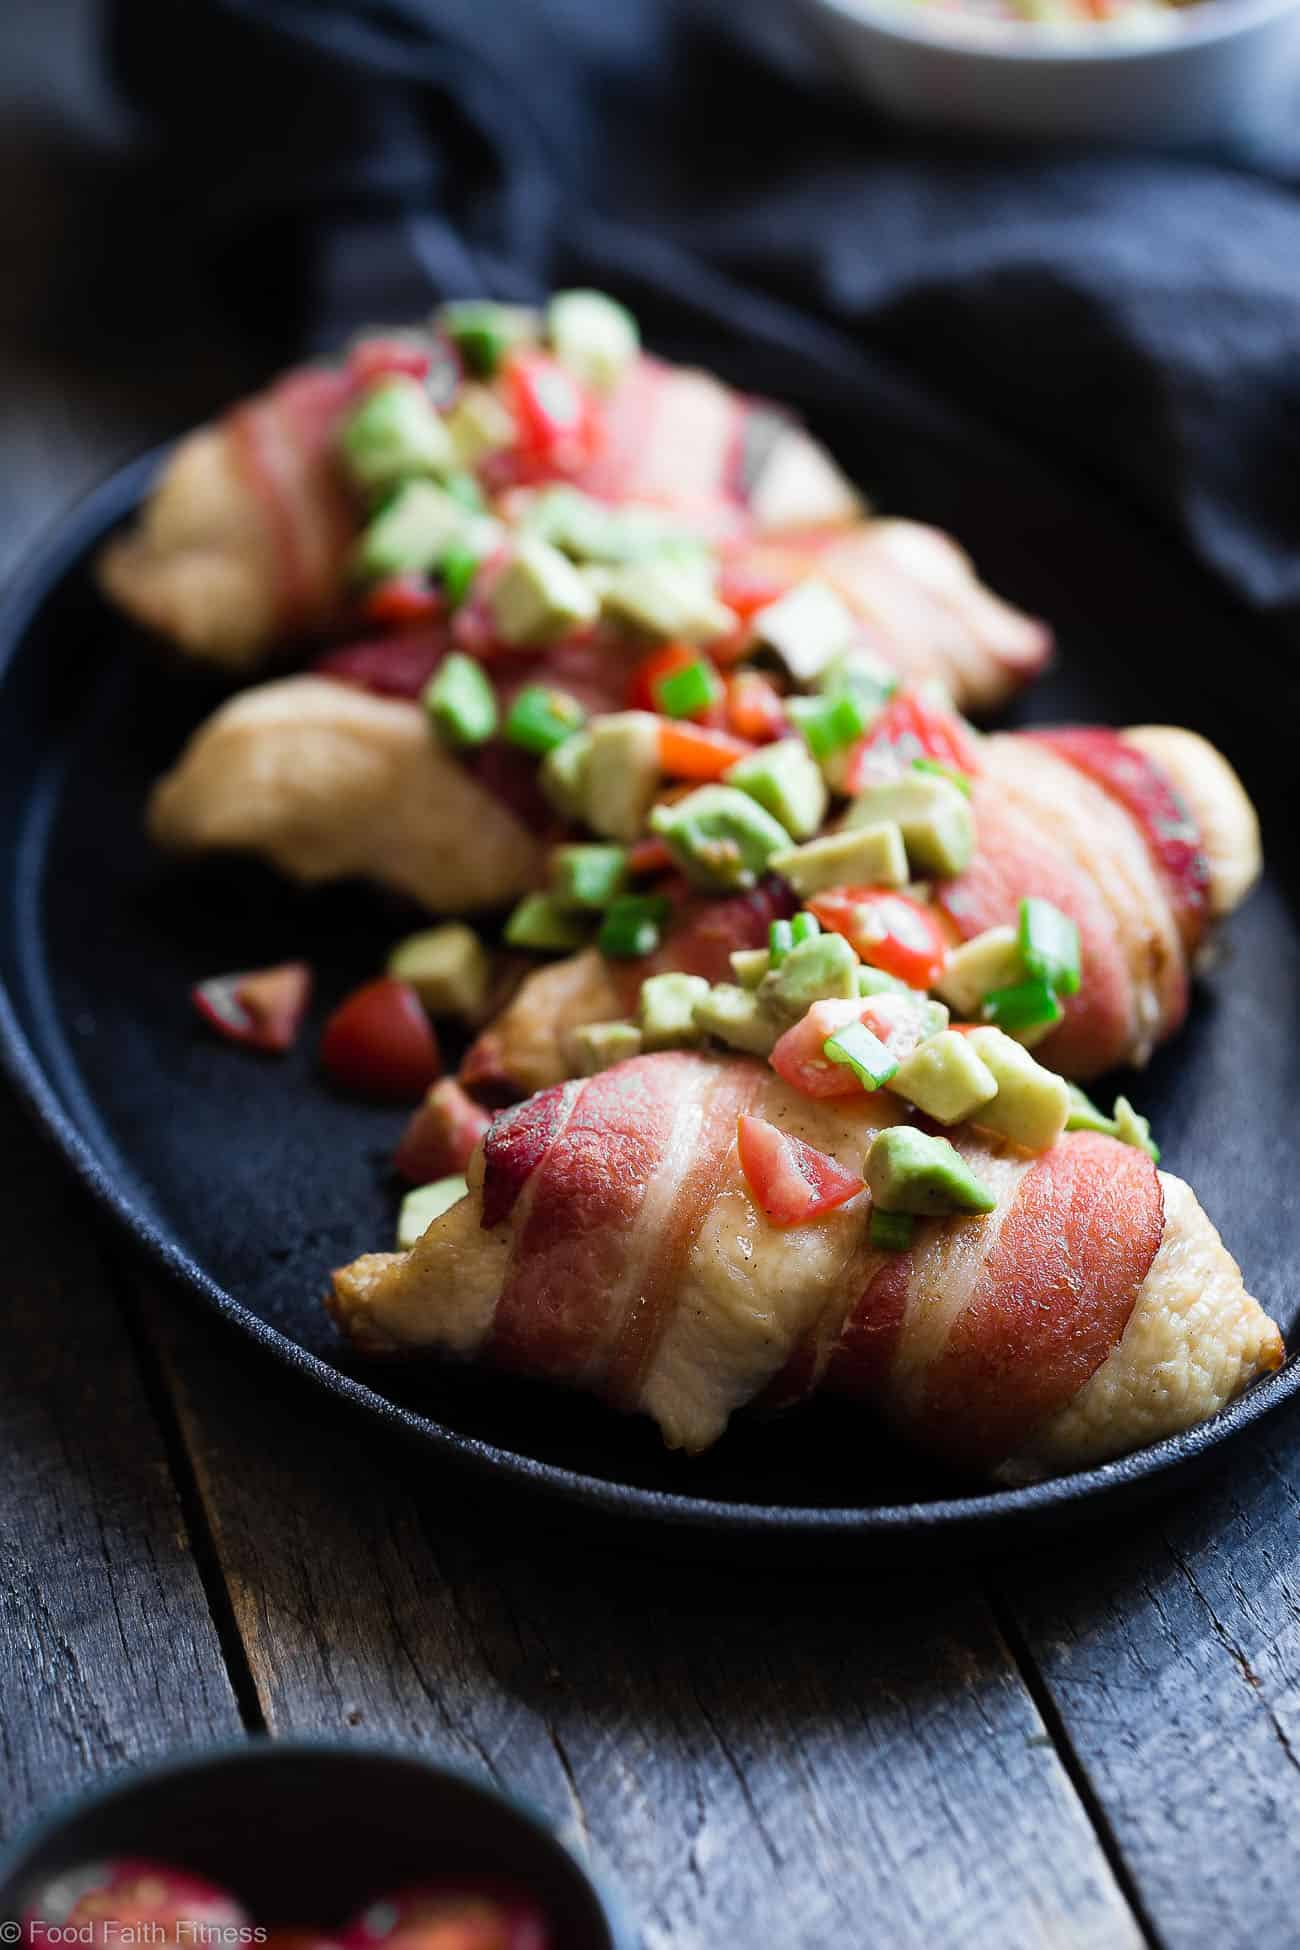 Whole30 Oven Baked Bacon Wrapped Chicken Breast - with a CREAMY, addicting avocado salsa, this is one quick and easy, kid friendly dinner that's paleo, keto and whole30 compliant! | Foodfaithfitness.com | @FoodFaithFit